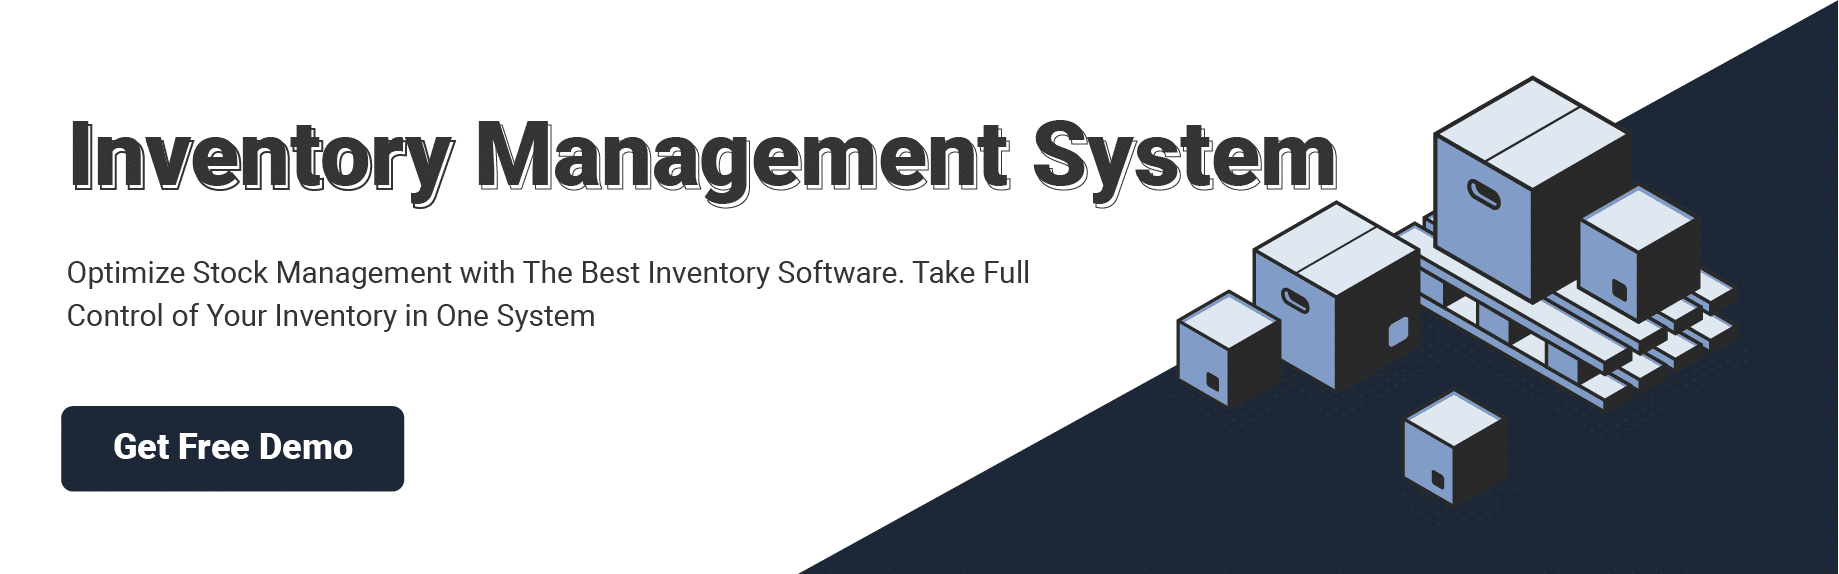 inventory automation